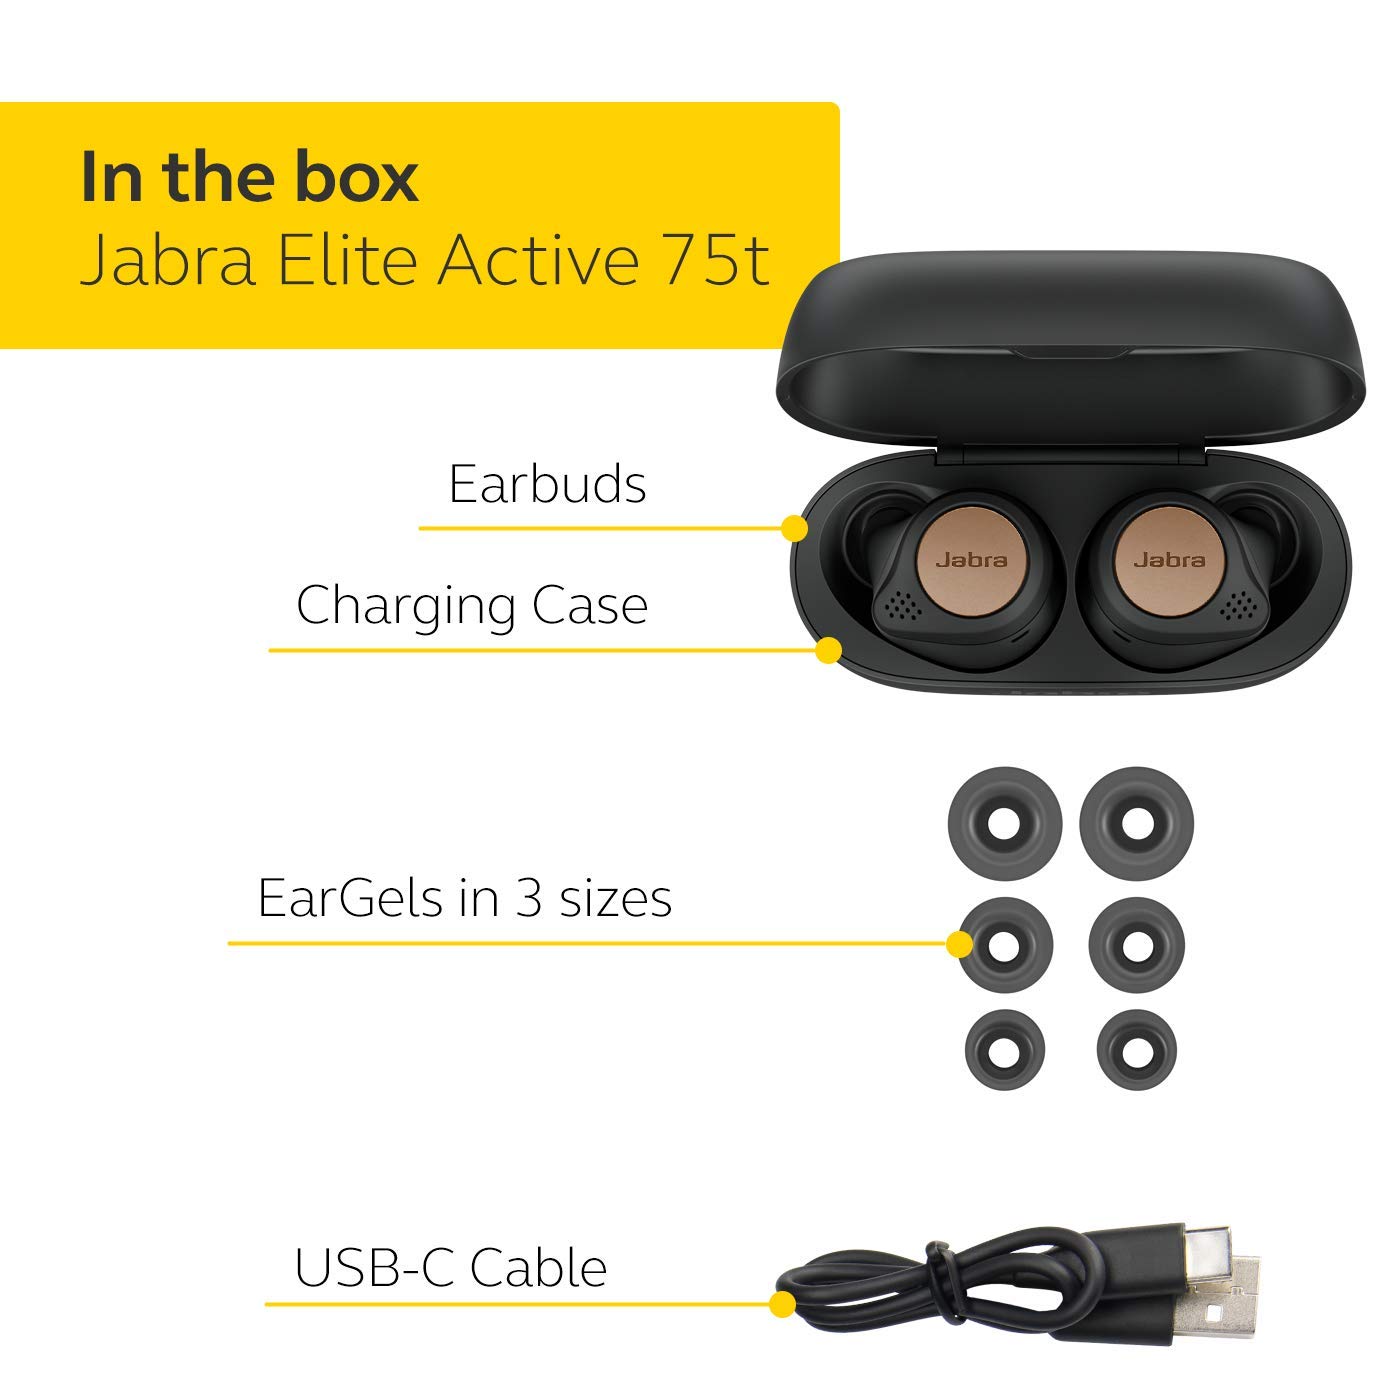 Jabra Elite Active 75t True Wireless Bluetooth Earbuds, Copper Black – Wireless Earbuds for Running and Sport, Charging Case Included, 24 Hour Battery, Active Noise Cancelling Sport Earbuds